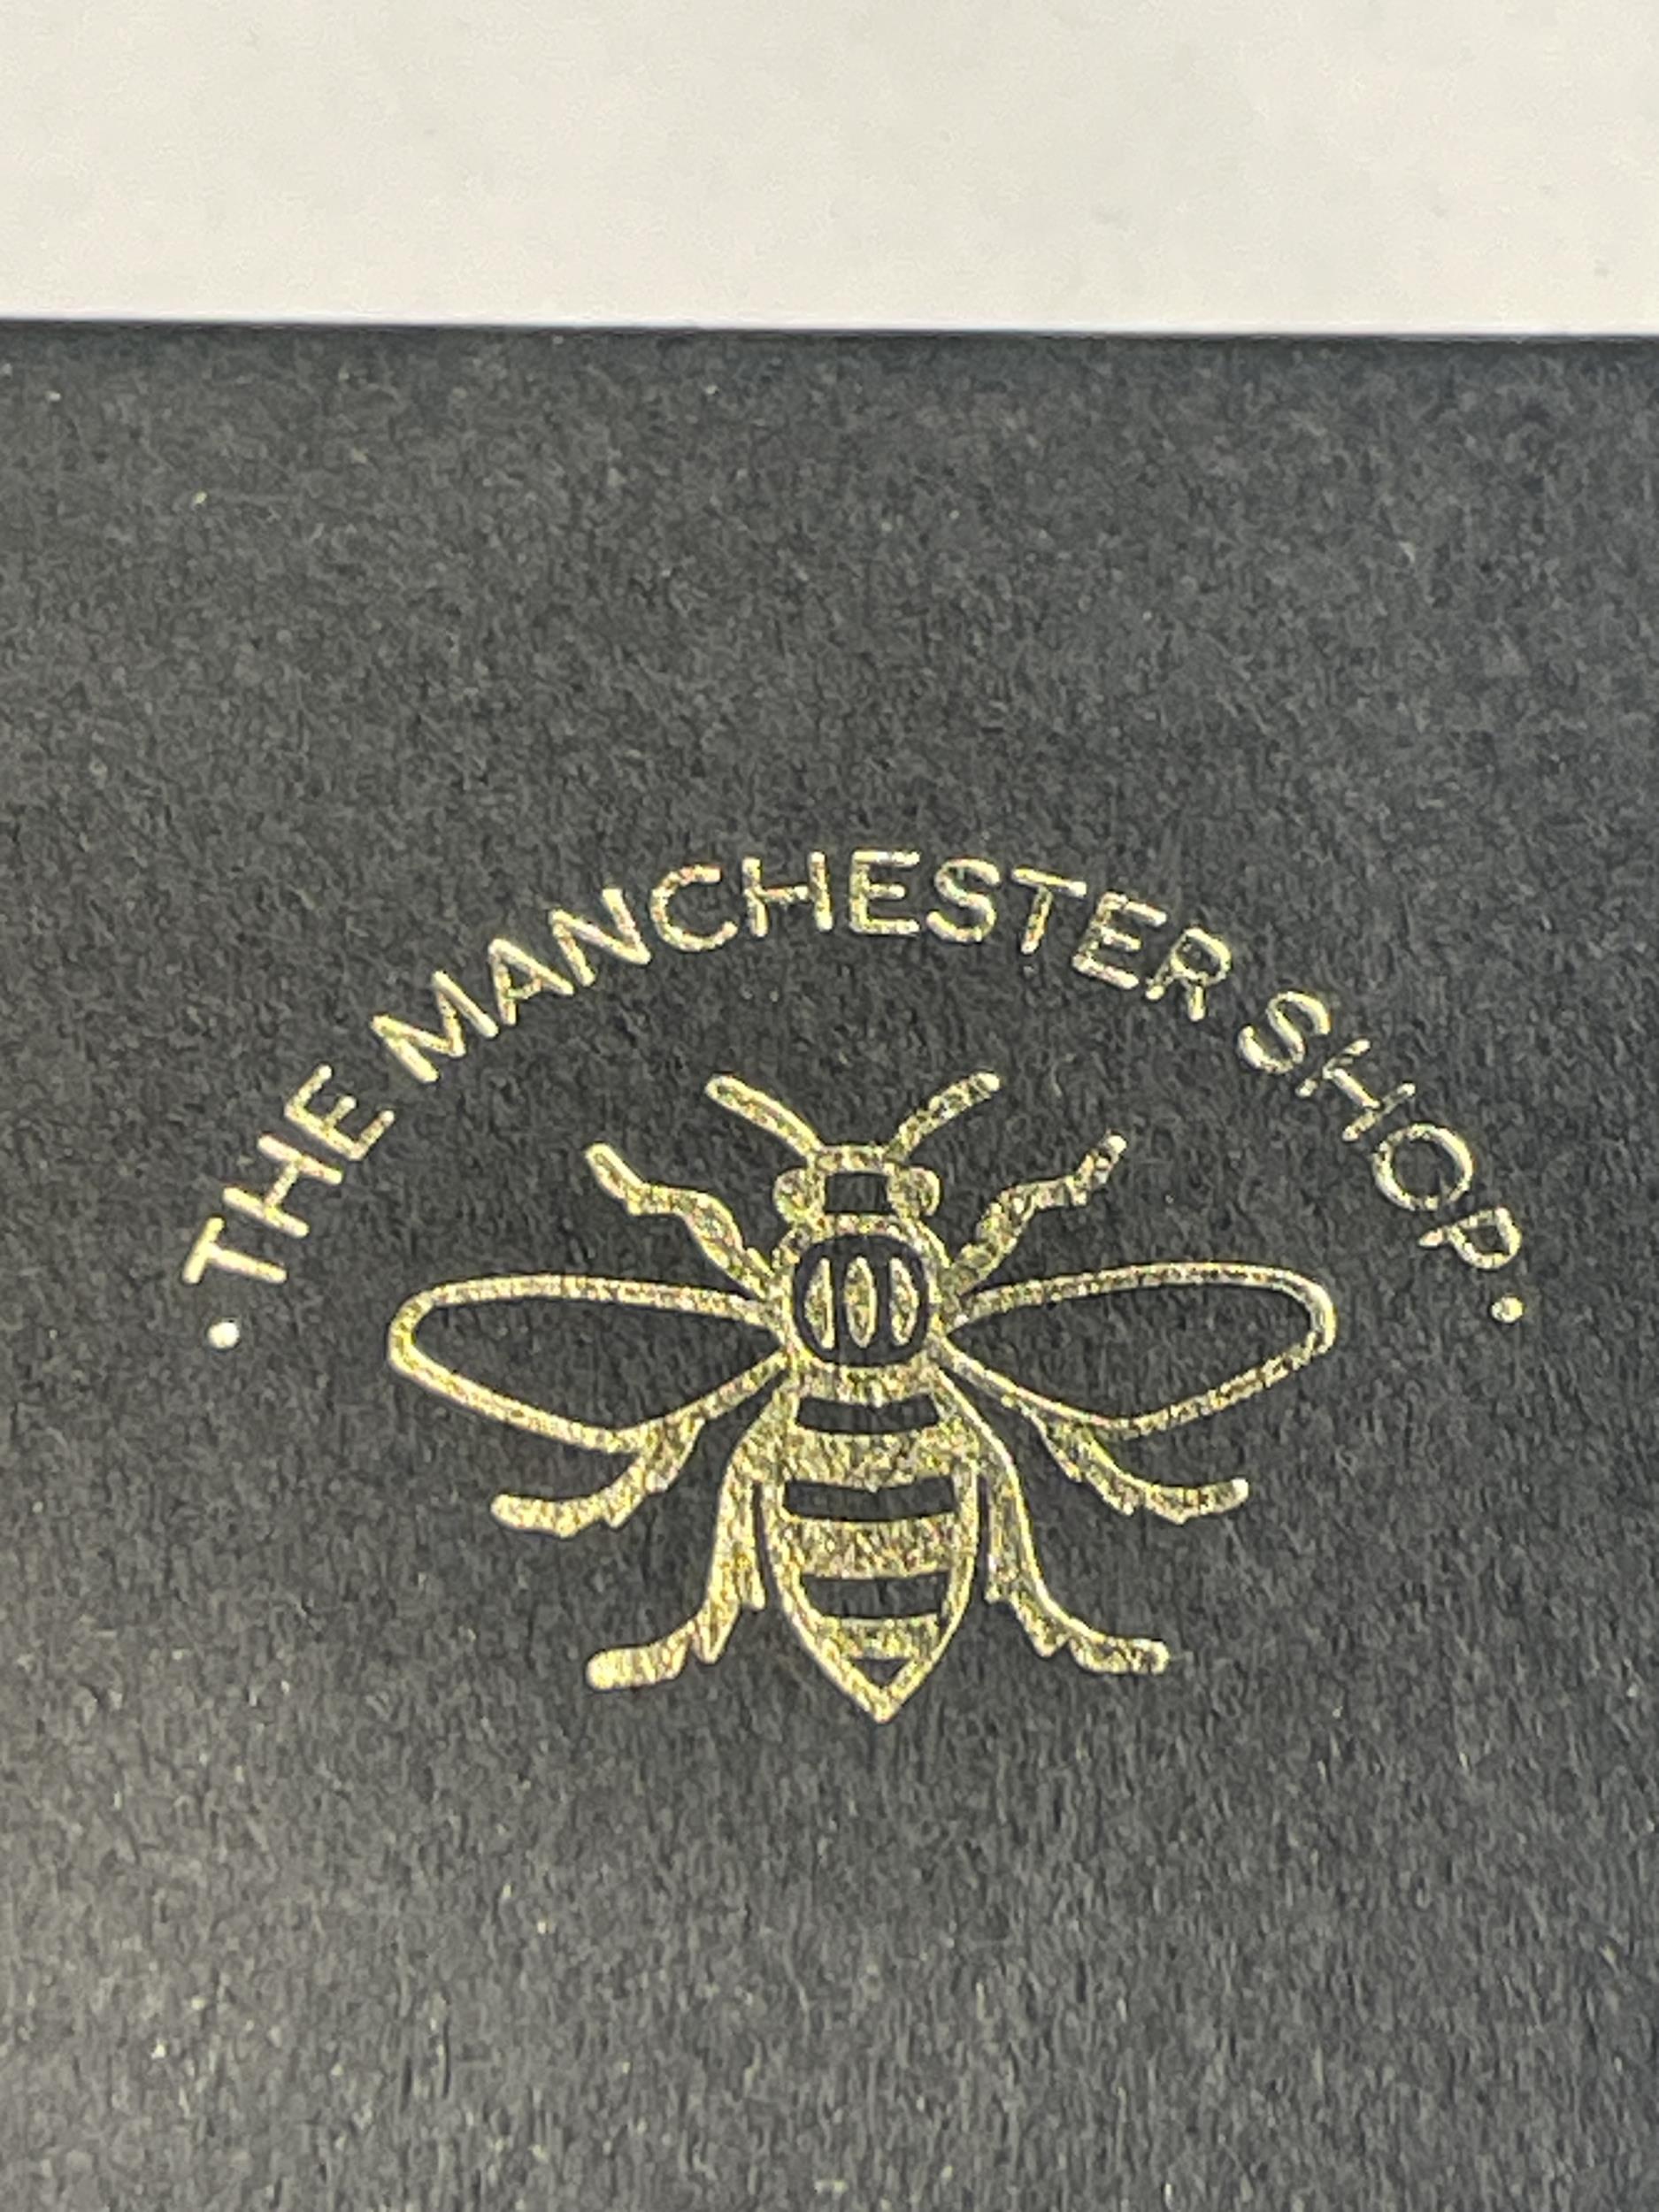 A MANCHESTER BEE BROOCH FROM THE MANCHESTER SHOP IN A PRESENTATION BOX - Image 4 of 4